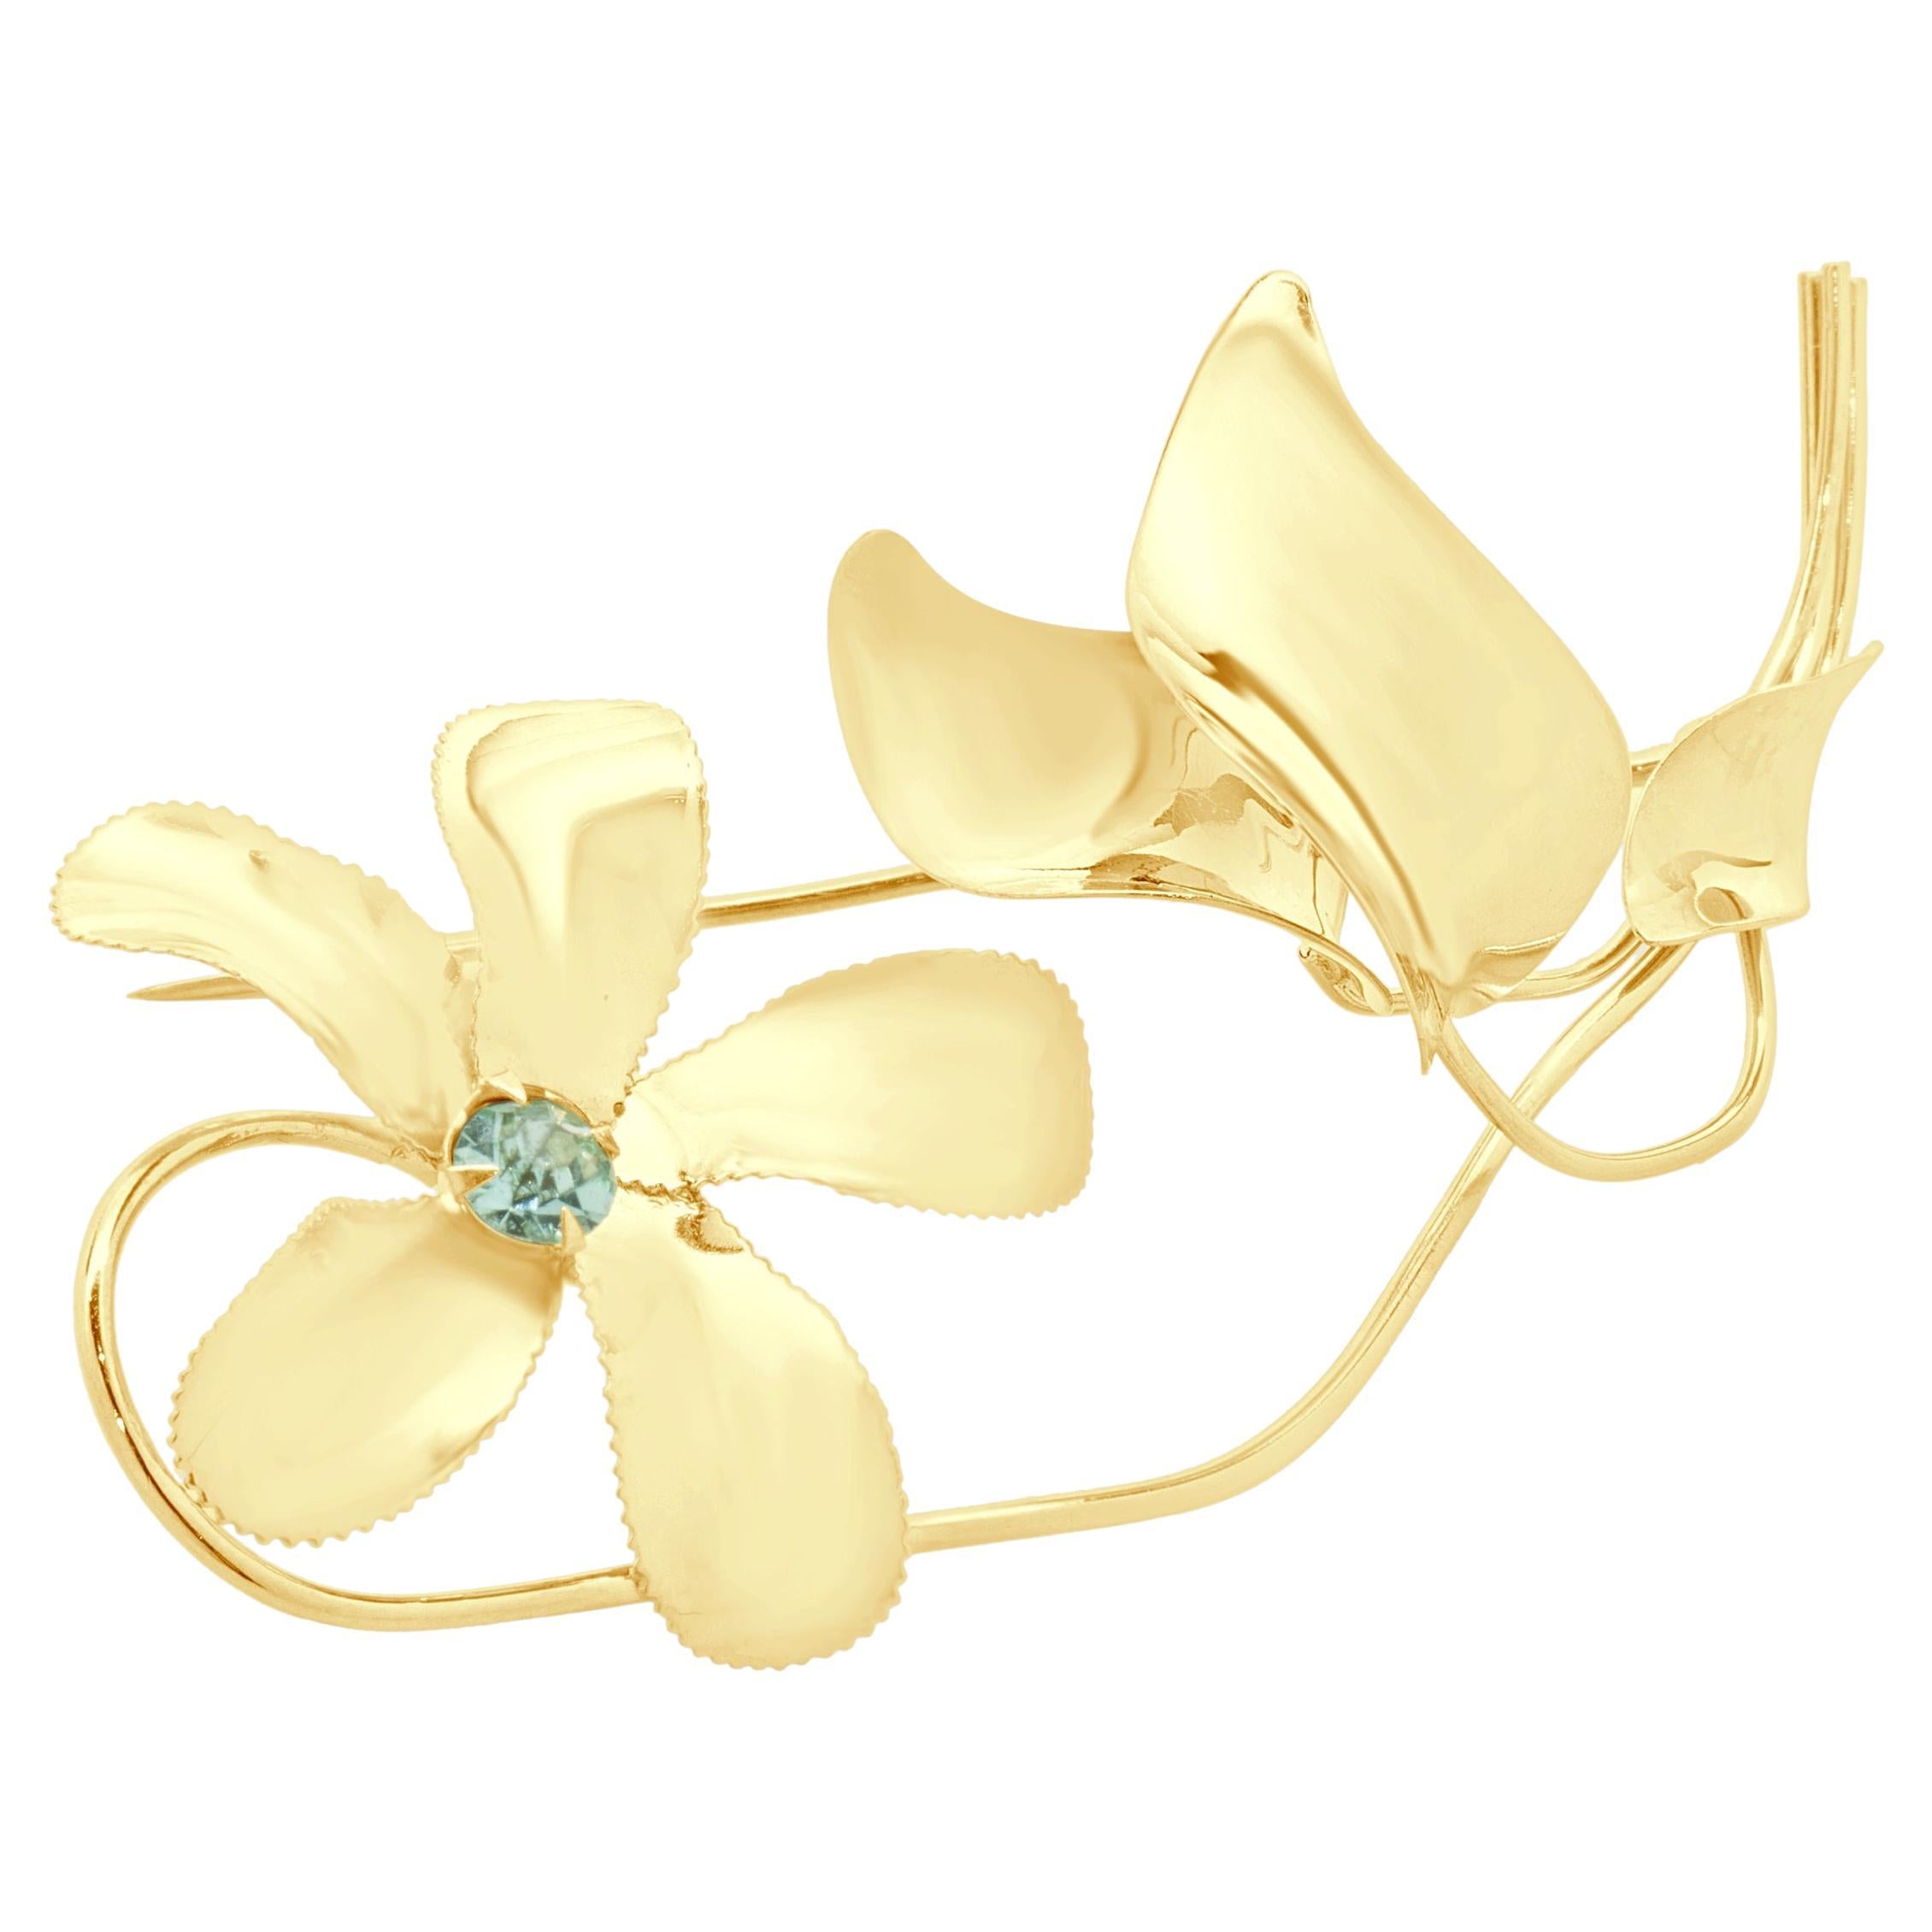 10 Karat Yellow Gold Flower Pin with Blue/Green Foil back Pin For Sale